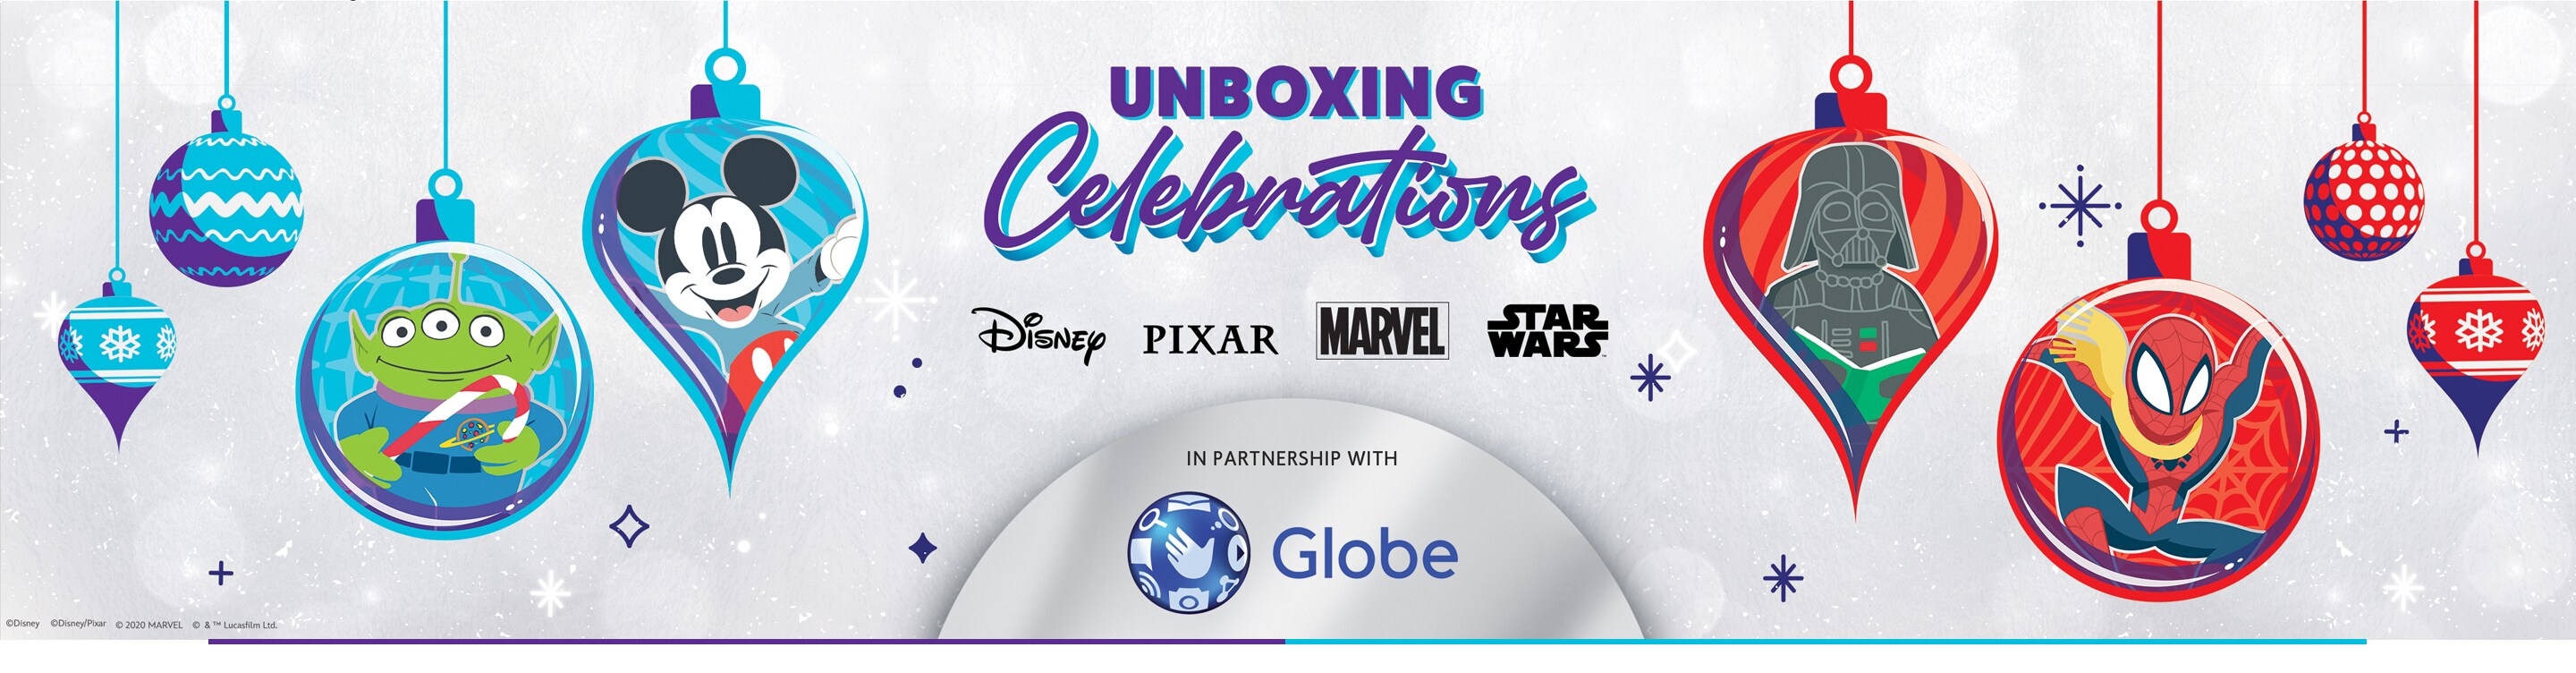 Unboxing Celebrations - Banner Hero Object